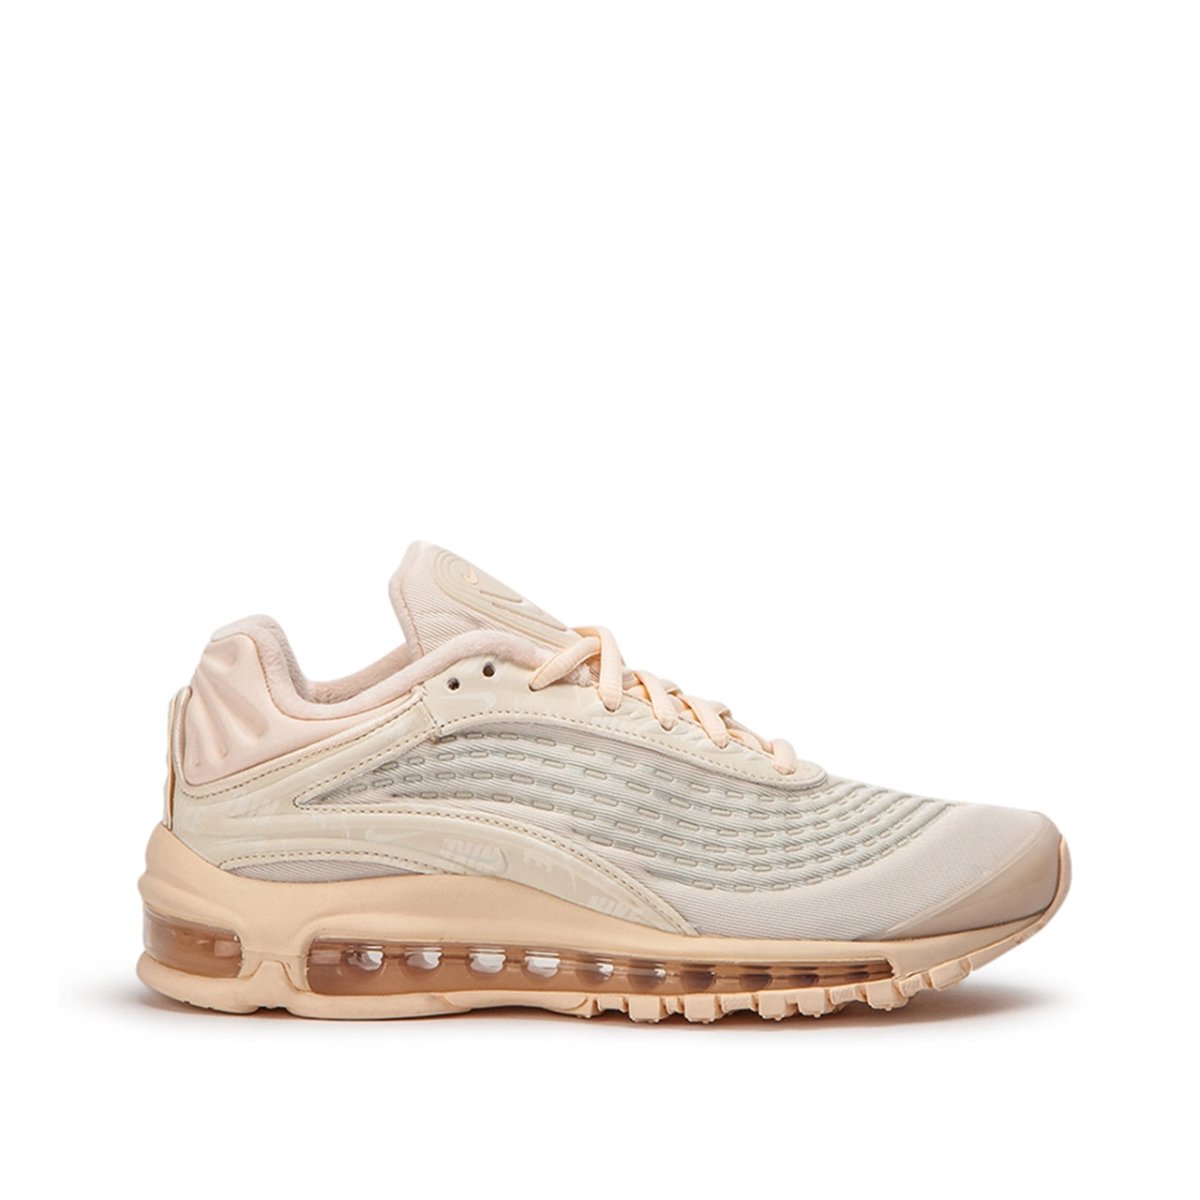 Nike WMNS Air Max Deluxe SE (Rosa)  - Allike Store